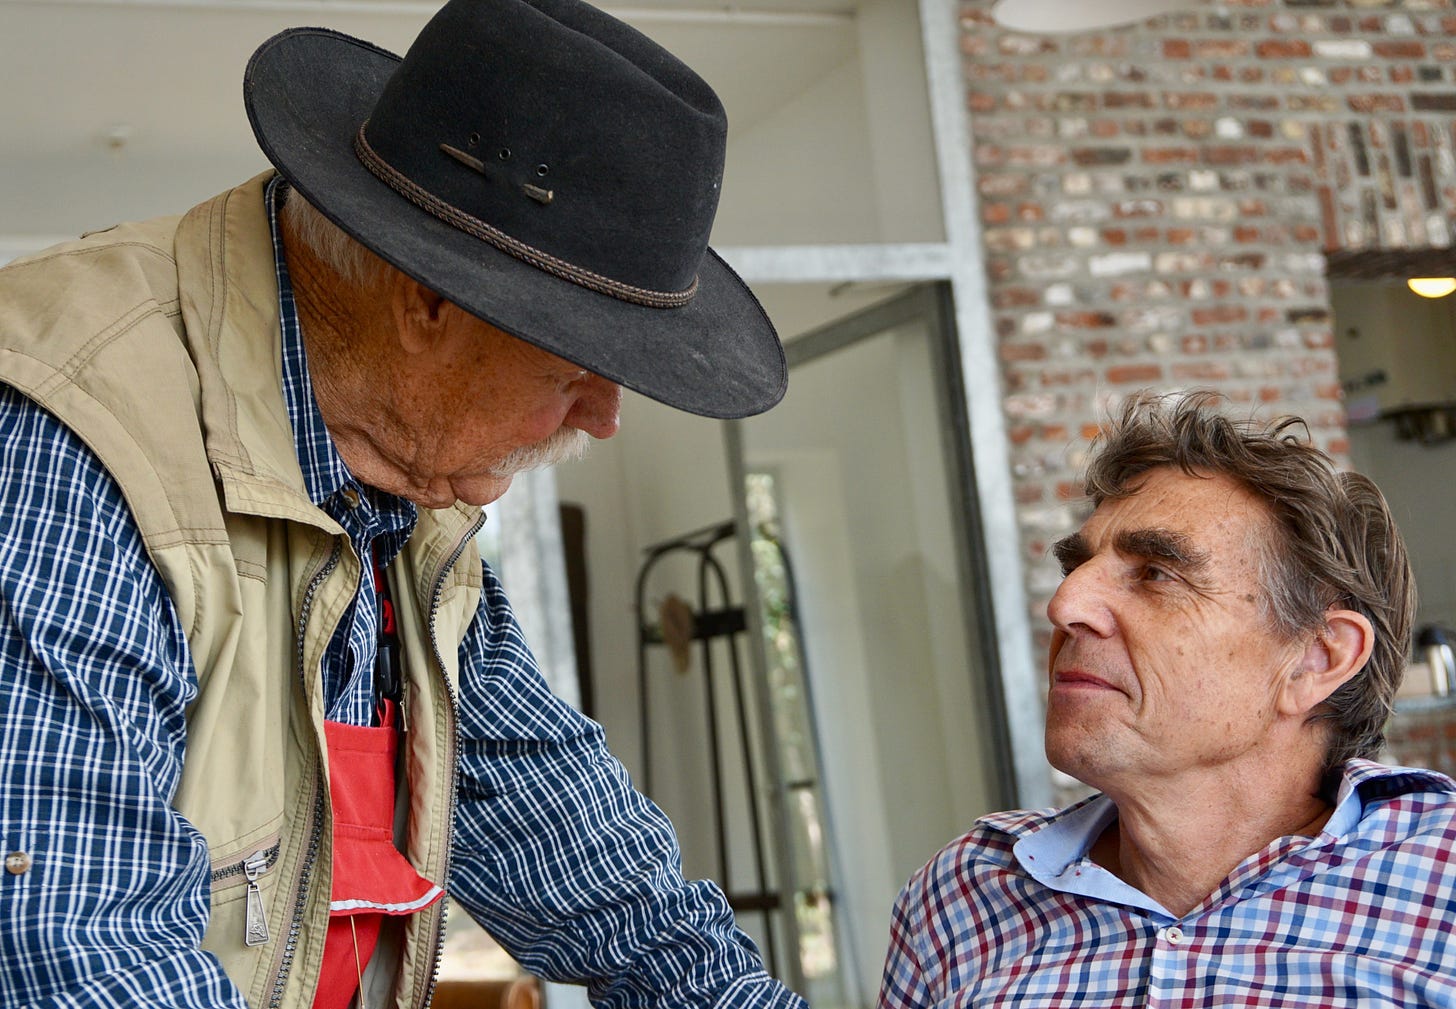 Two older men look at each other. One is wearing a hat, and they're both in plaid shirts.